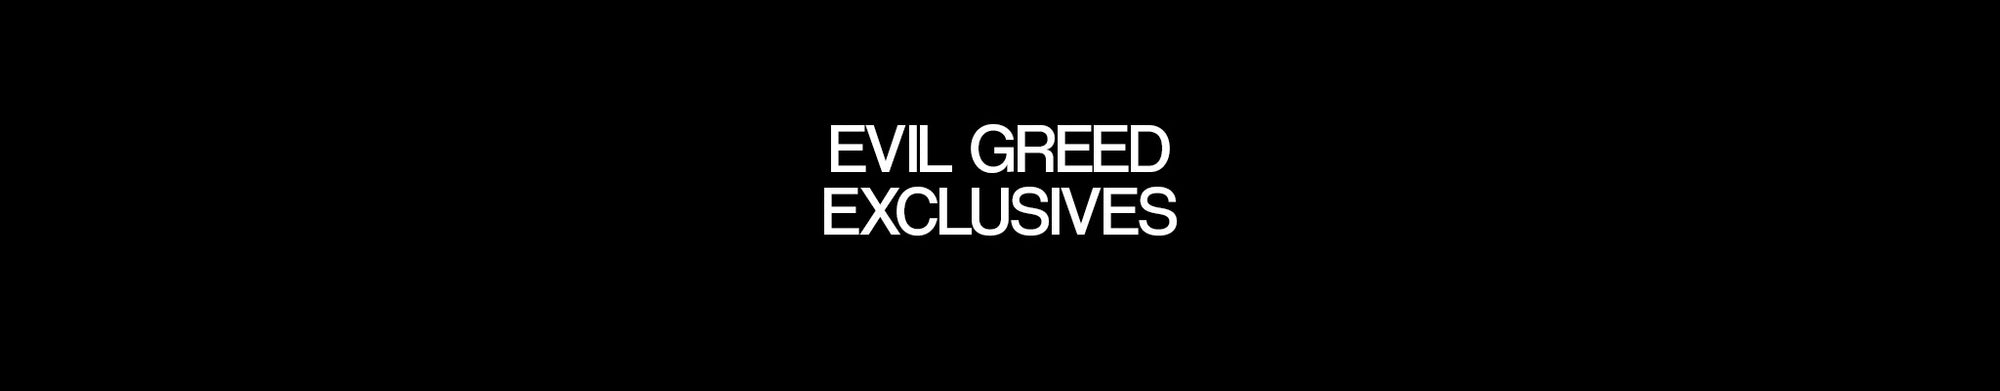 EVIL GREED EXCLUSIVES